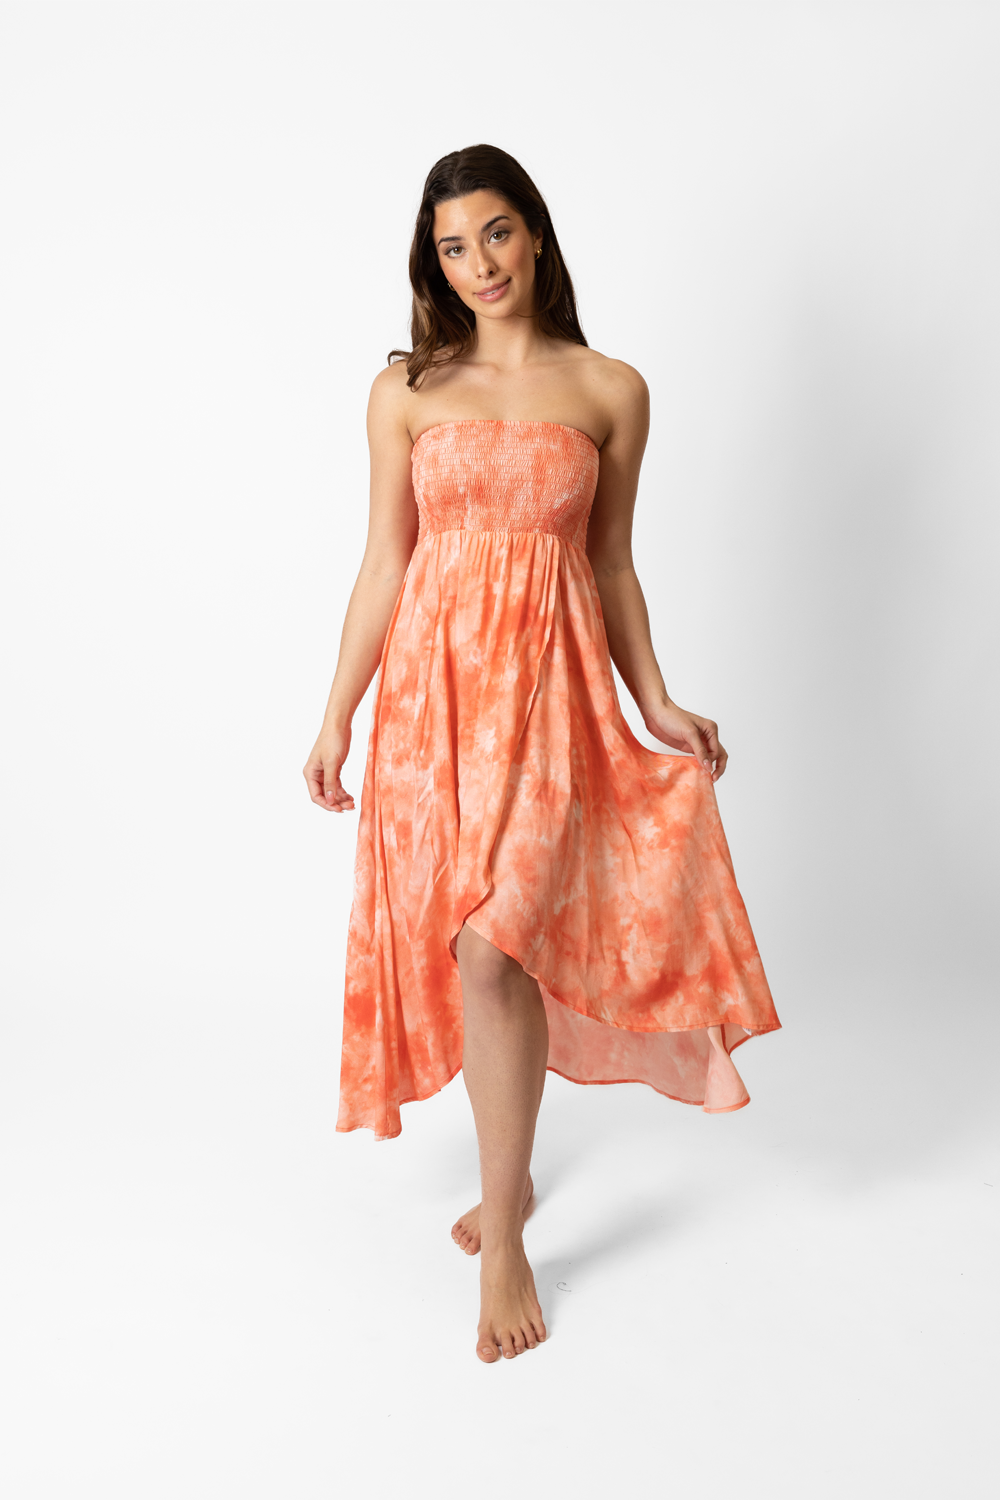 A woman standing in a photo shoot studio, wearing a coral tie-dye dress. The dress is a vibrant shade of pink, with a unique tie-dye pattern that creates a marbled effect. It has a flowing, loose fit that skims the top of her knees.